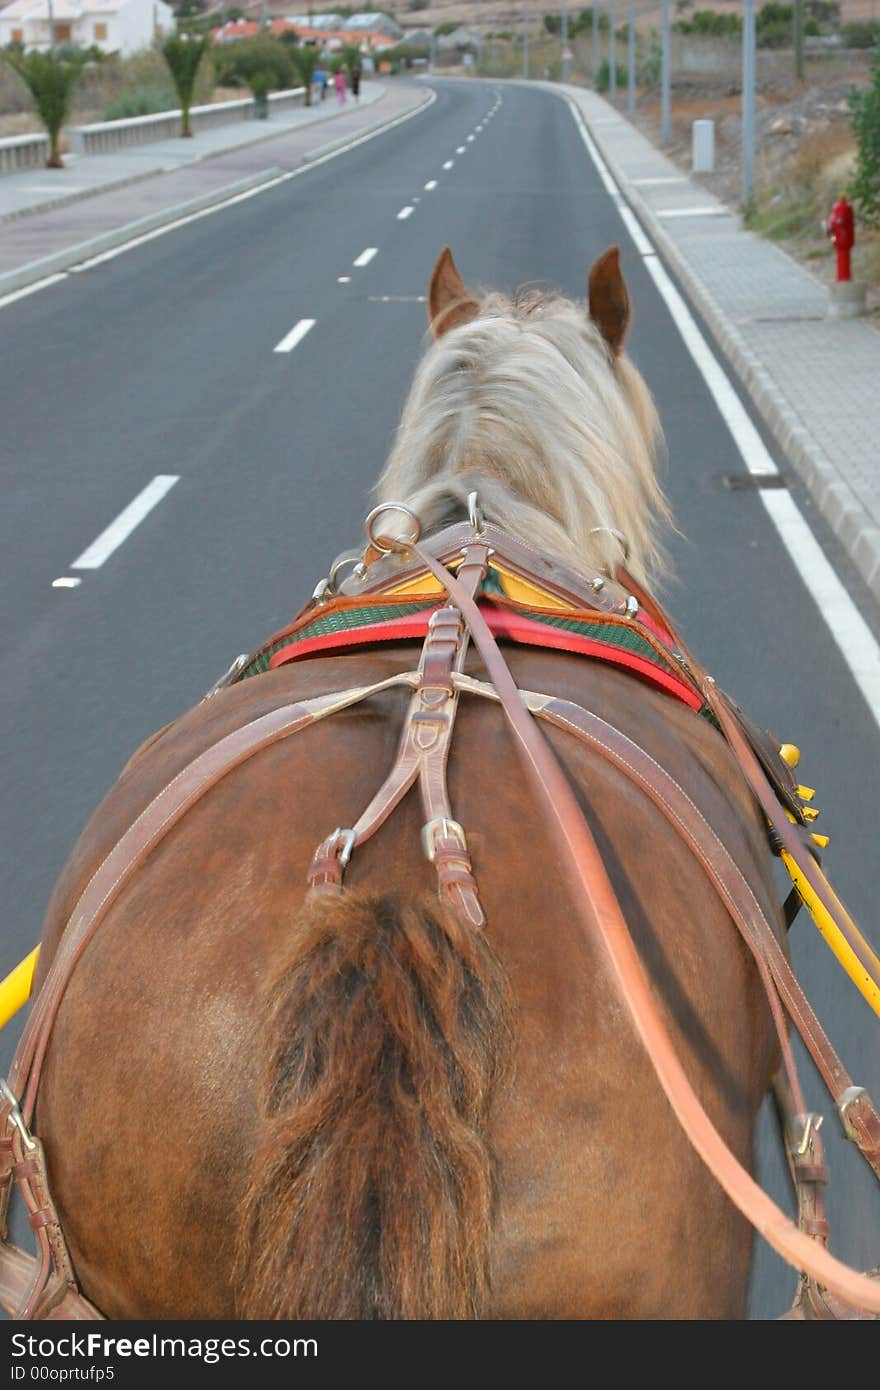 View of a horse walking on the road. View of a horse walking on the road